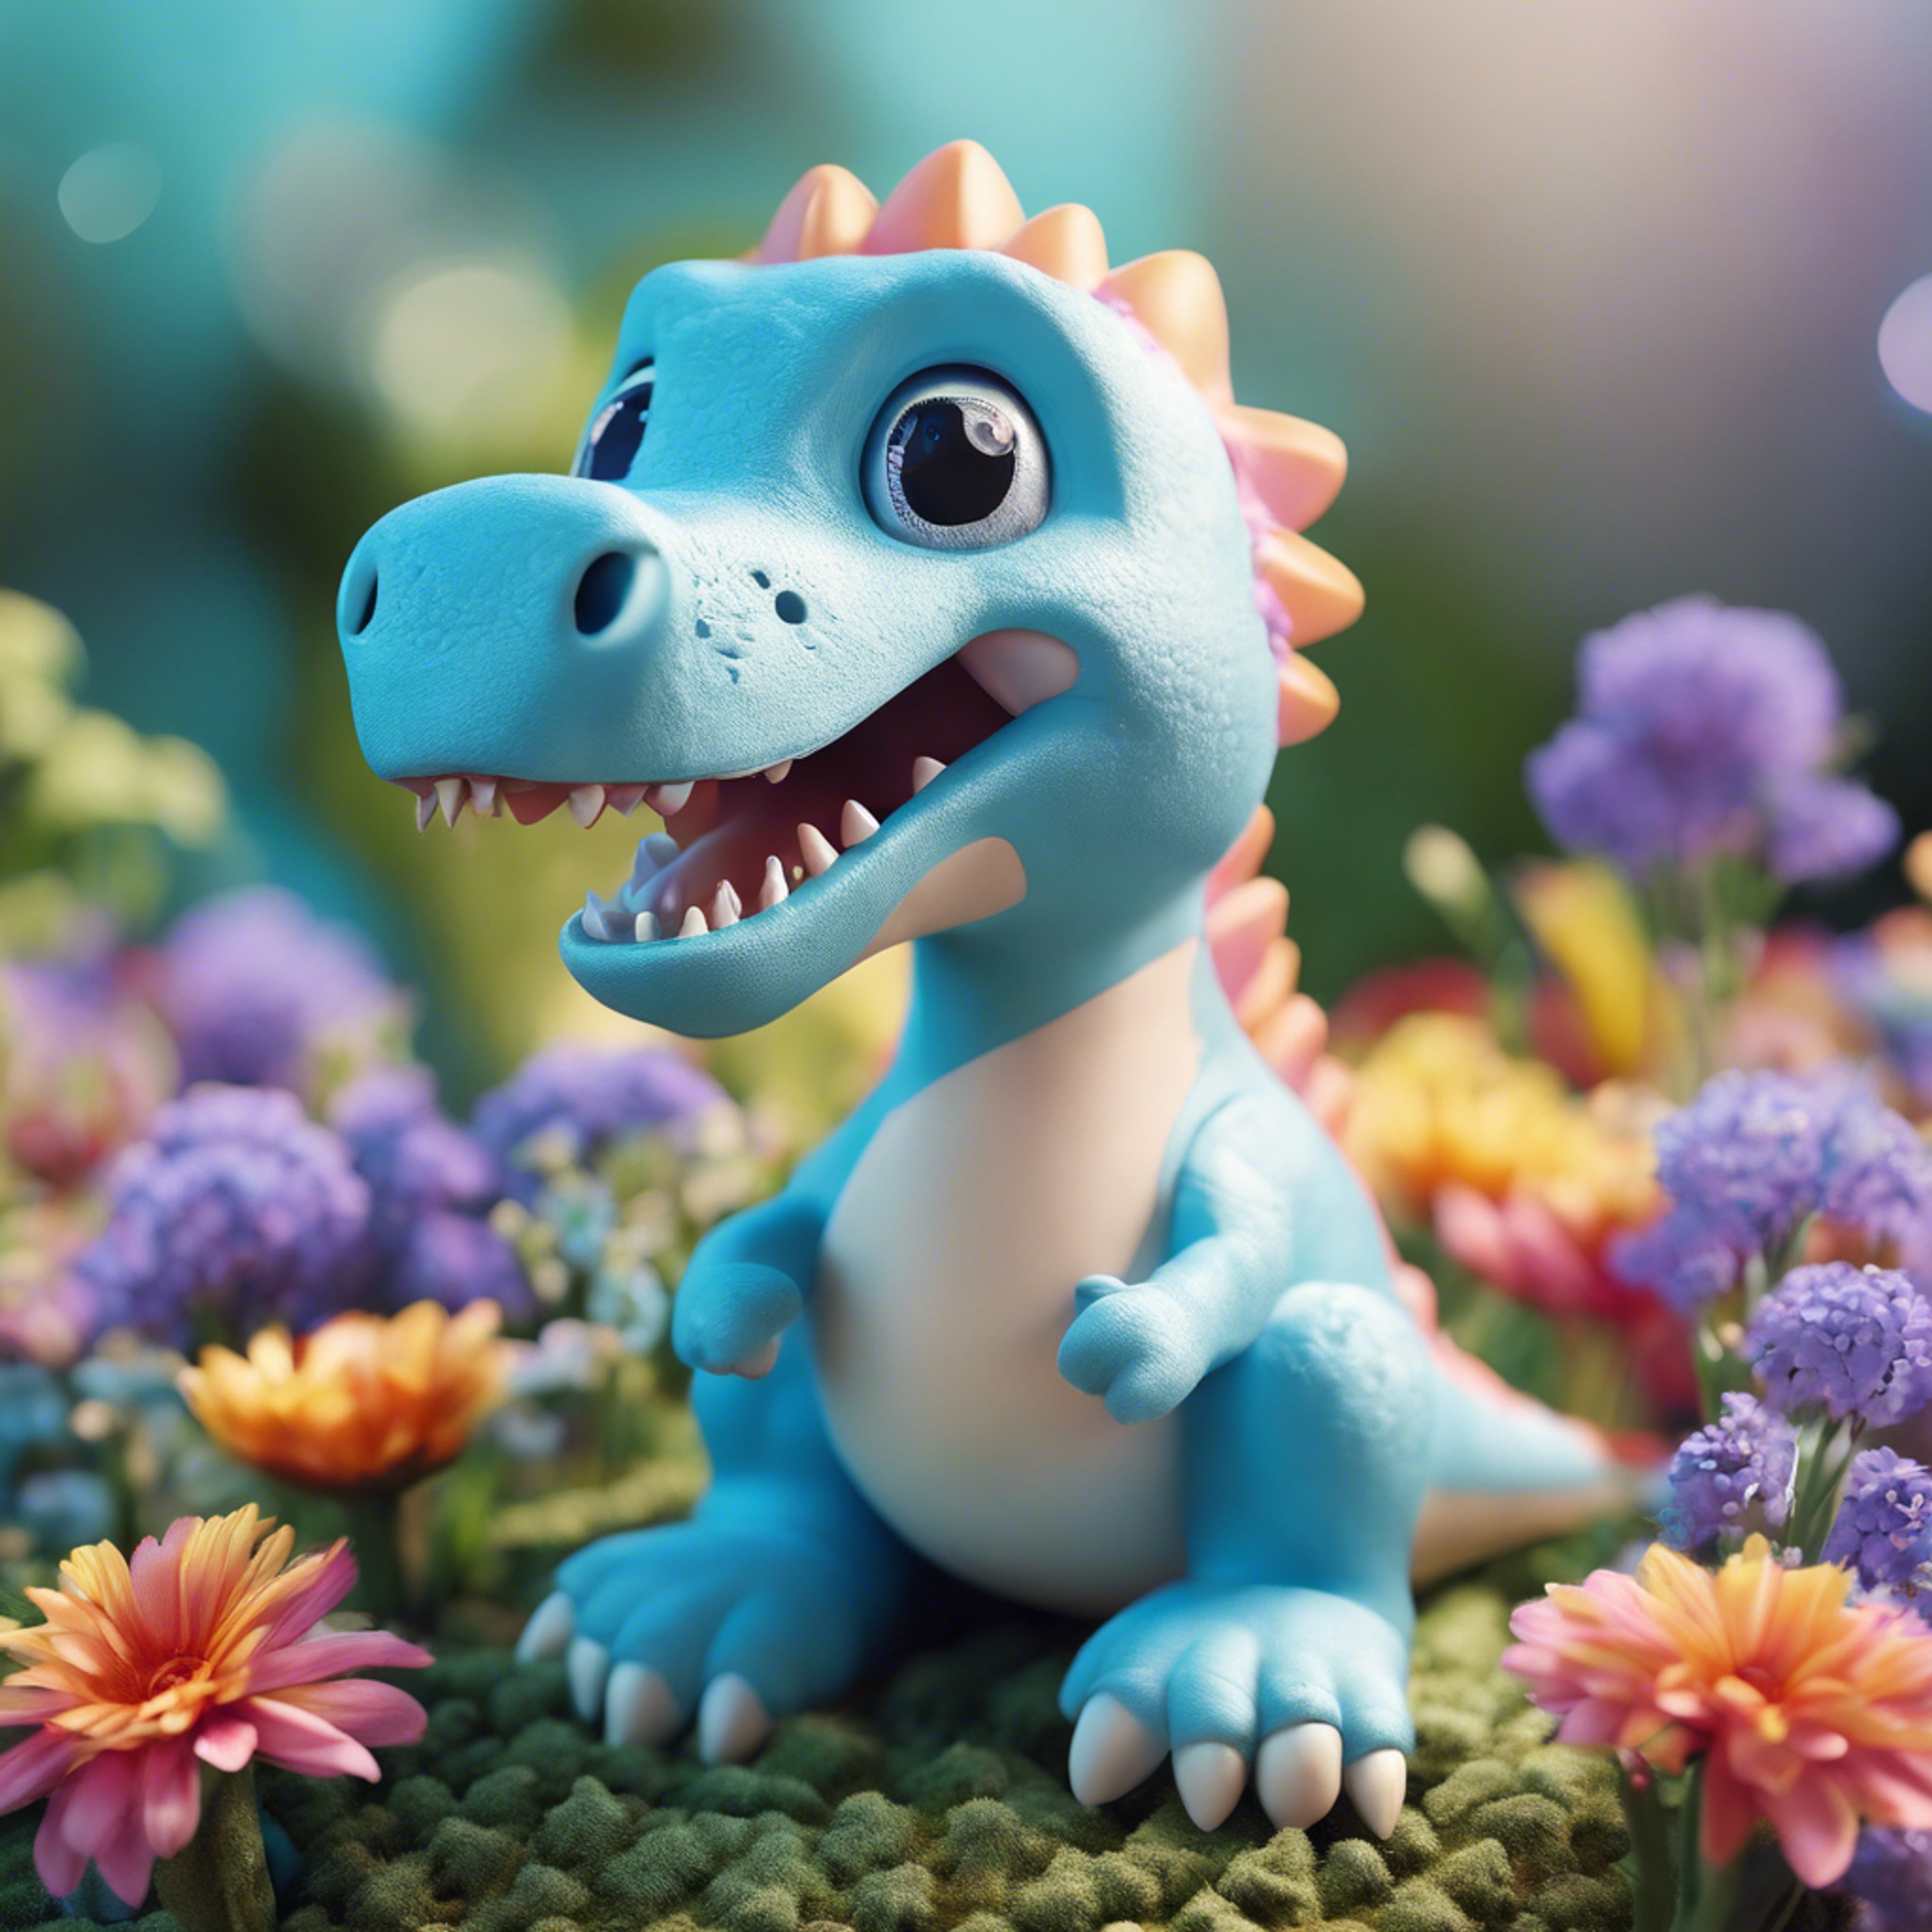 A cute light blue dinosaur with a kawaii expression, surrounded by brightly colored flowers. Wallpaper[445e6142c59b4fa2886e]